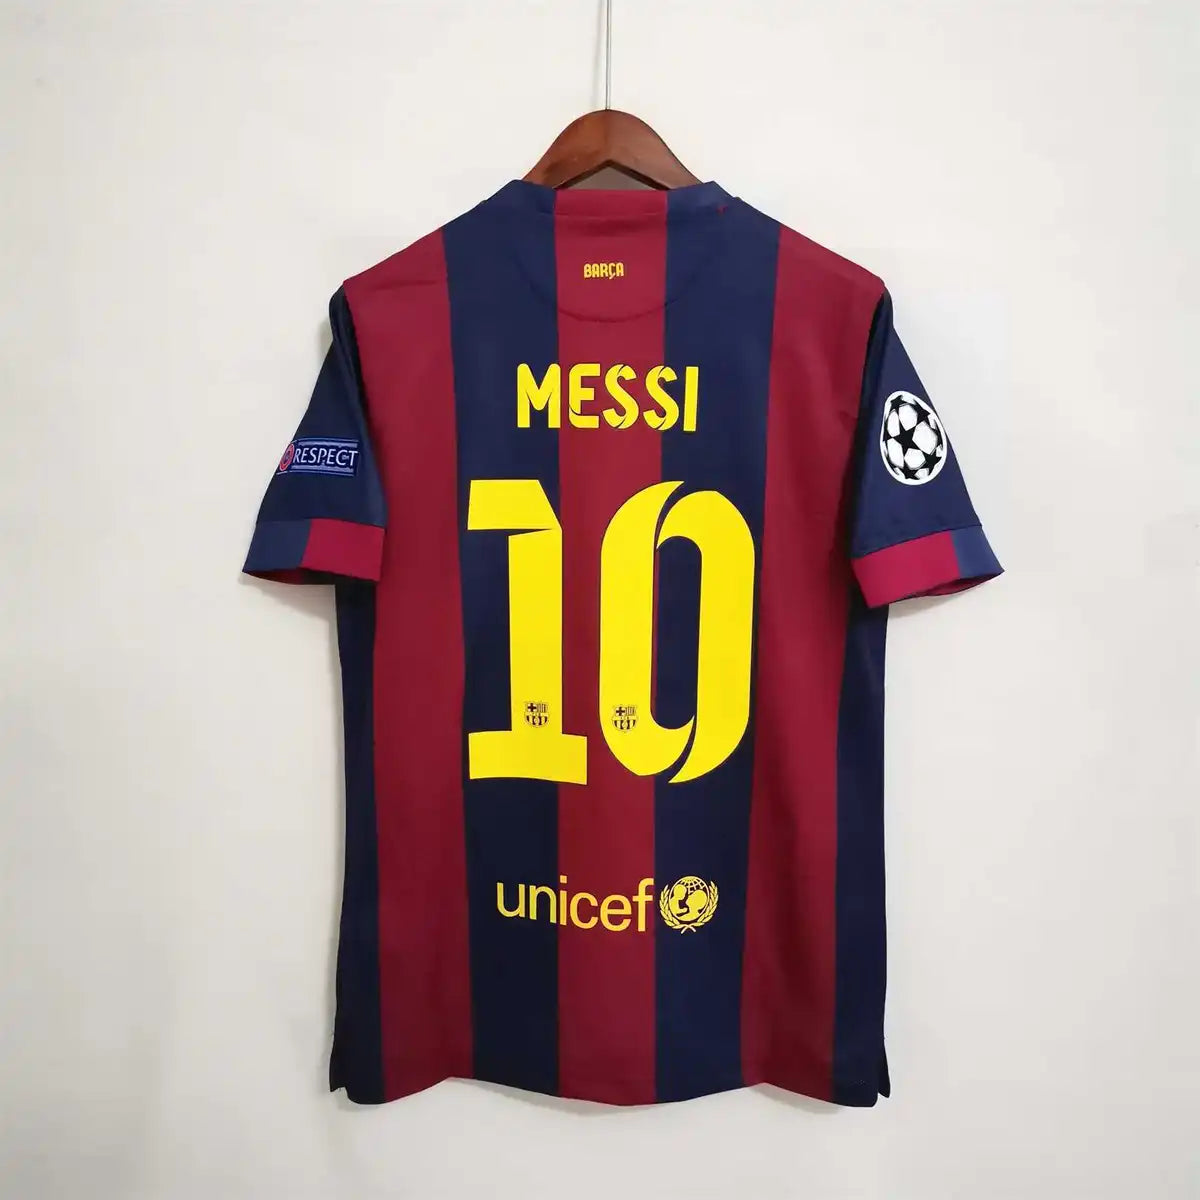 Lionel Messi FC Barcelona Nike 2014/15 UEFA Champions League Final Authentic Iconic Nike Jersey - Blue & Red